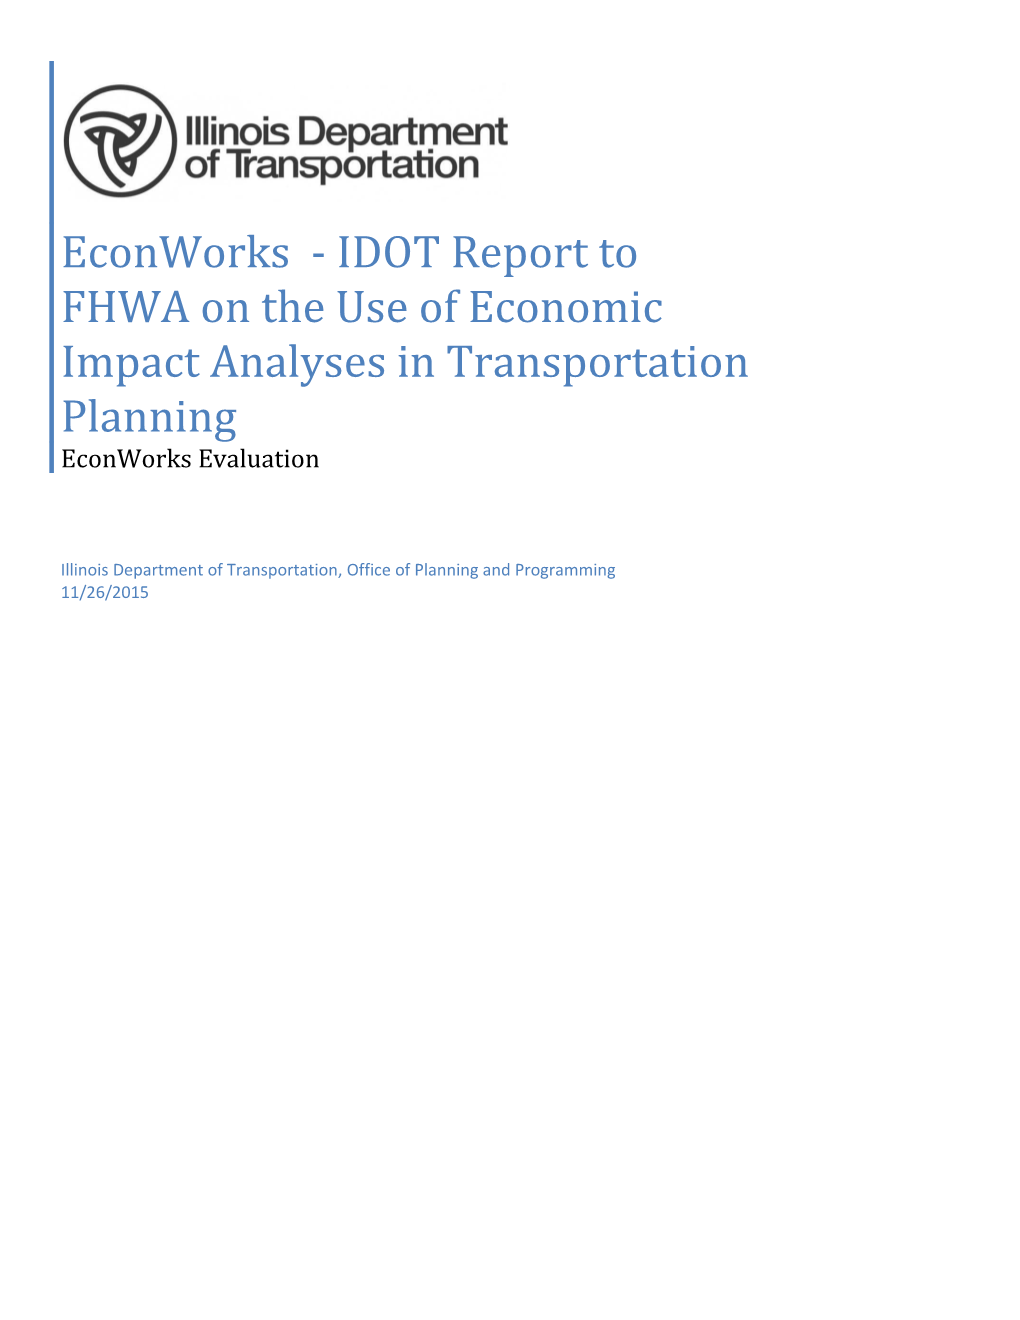 Econworks - IDOT Report to FHWA on the Use of Economic Impact Analyses in Transportation